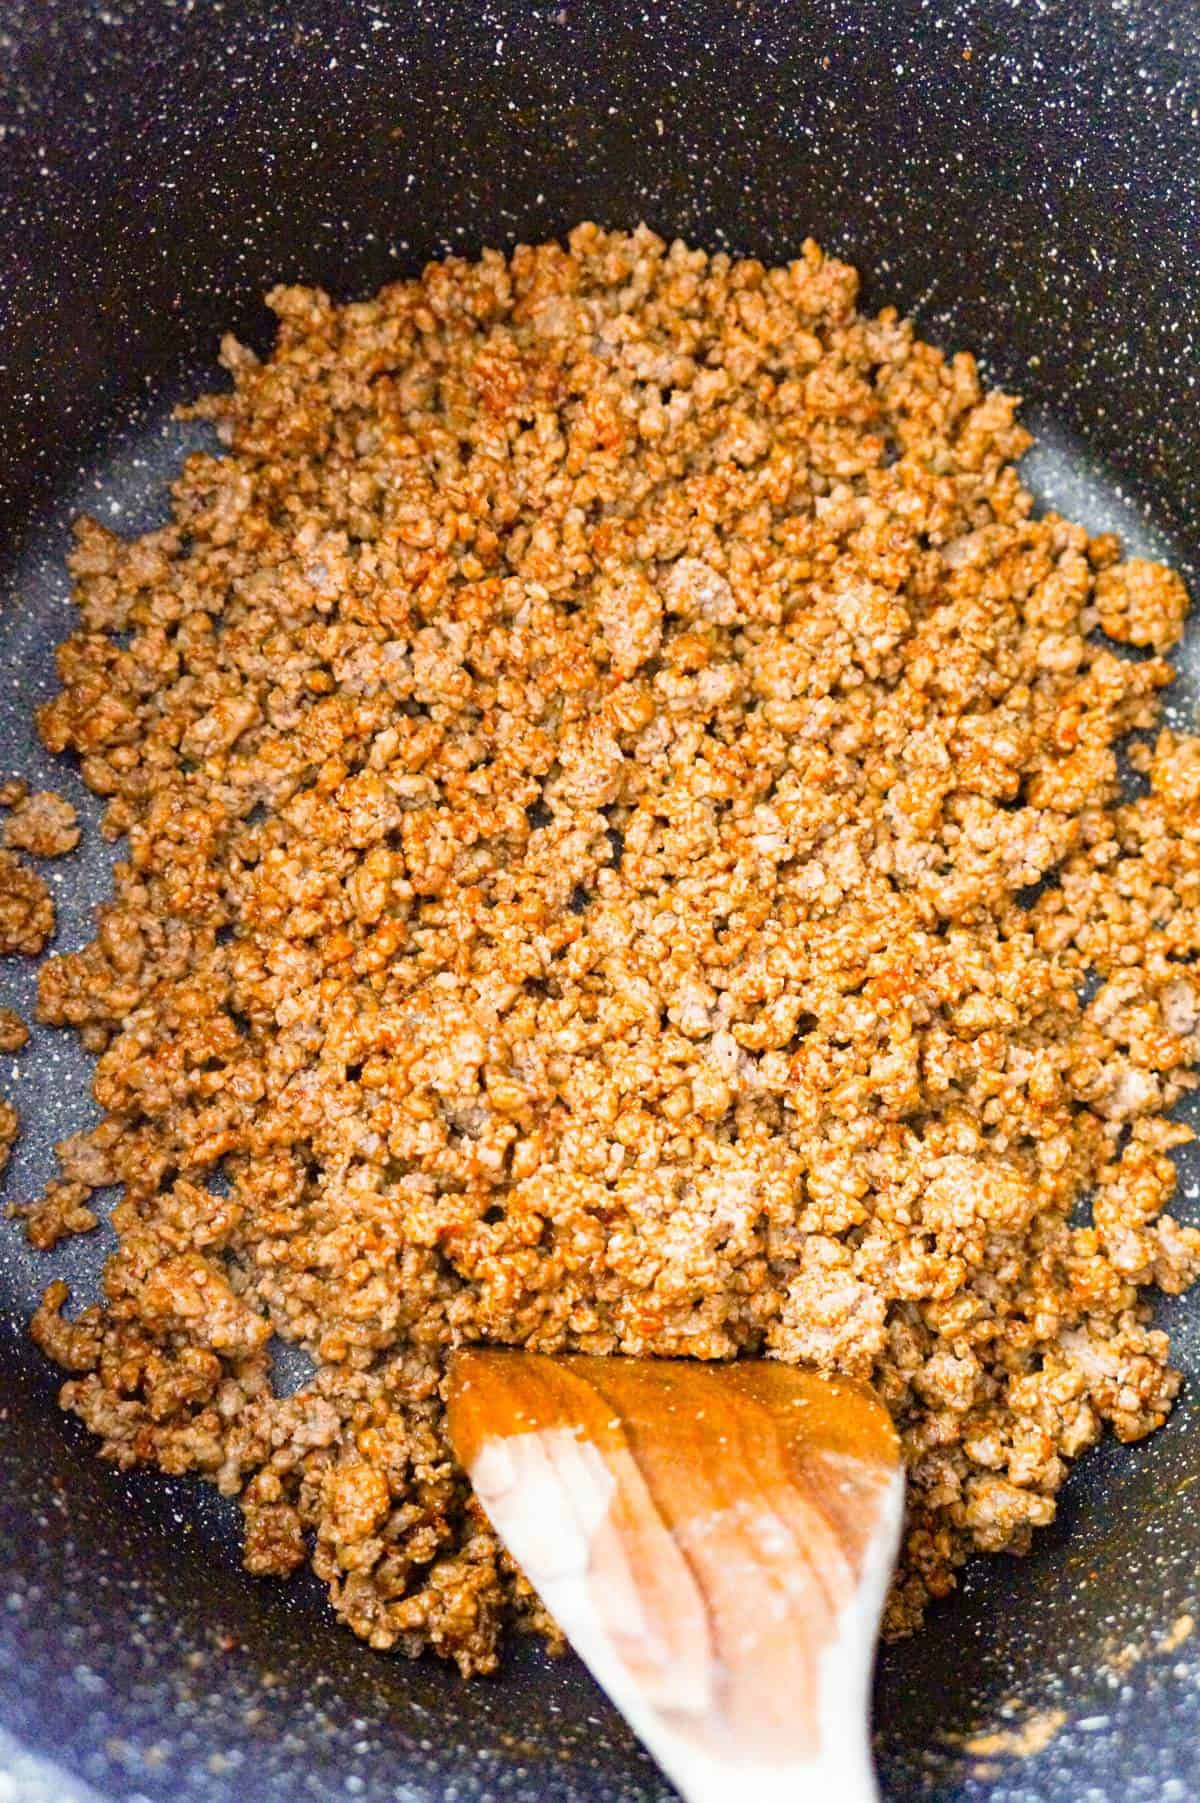 ground beef coated in chili seasoning in a large pot